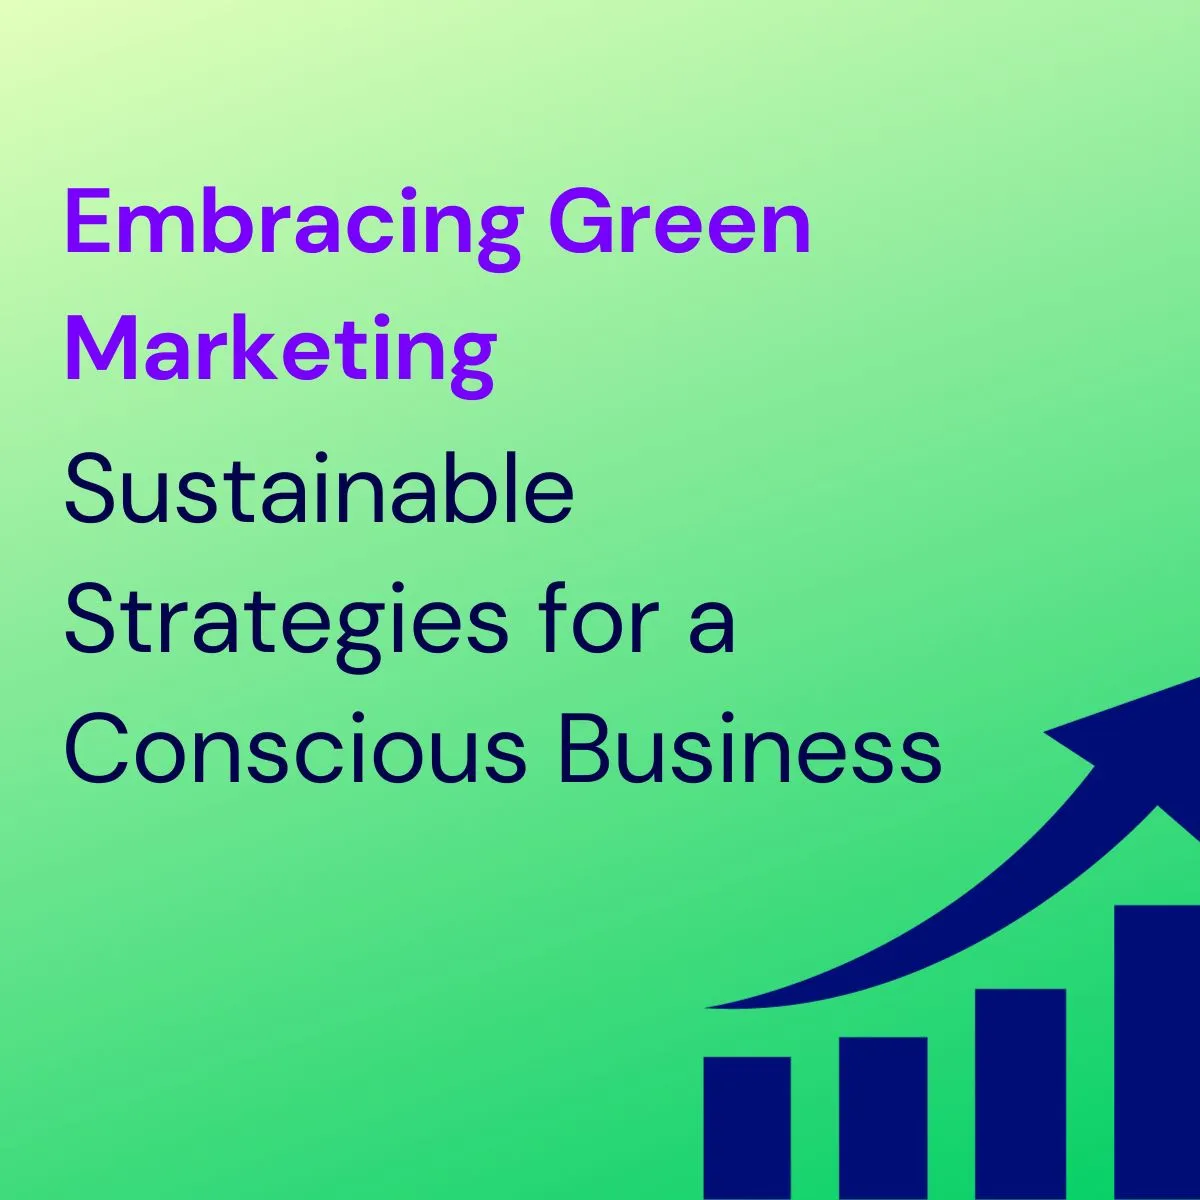 Embracing Green Marketing: Sustainable Strategies for a Conscious Business